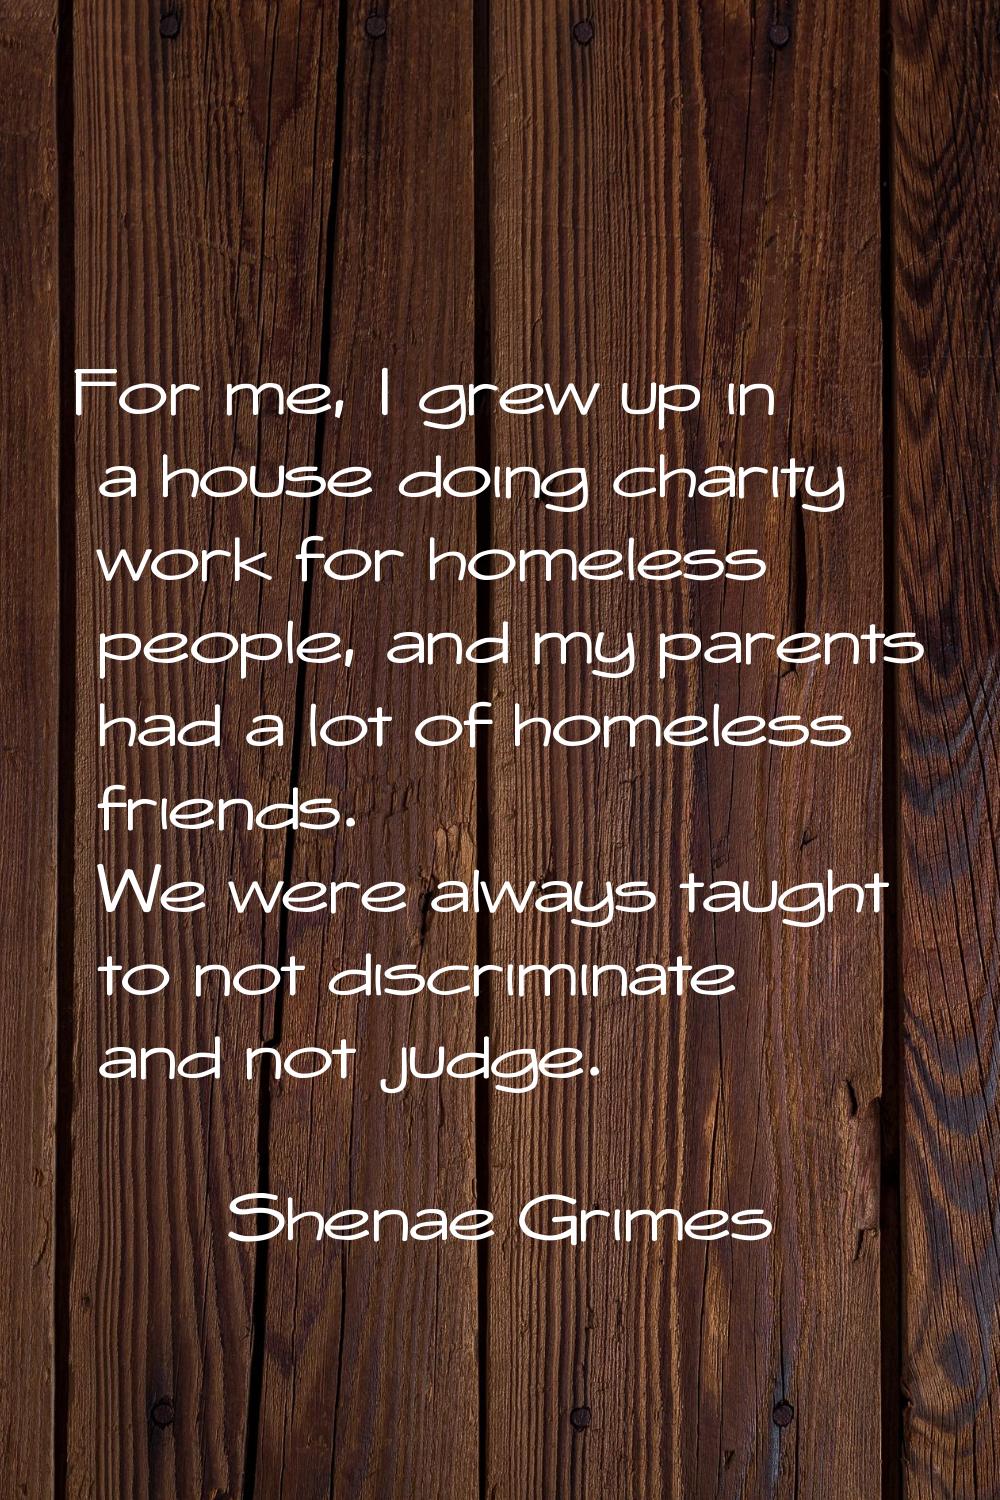 For me, I grew up in a house doing charity work for homeless people, and my parents had a lot of ho